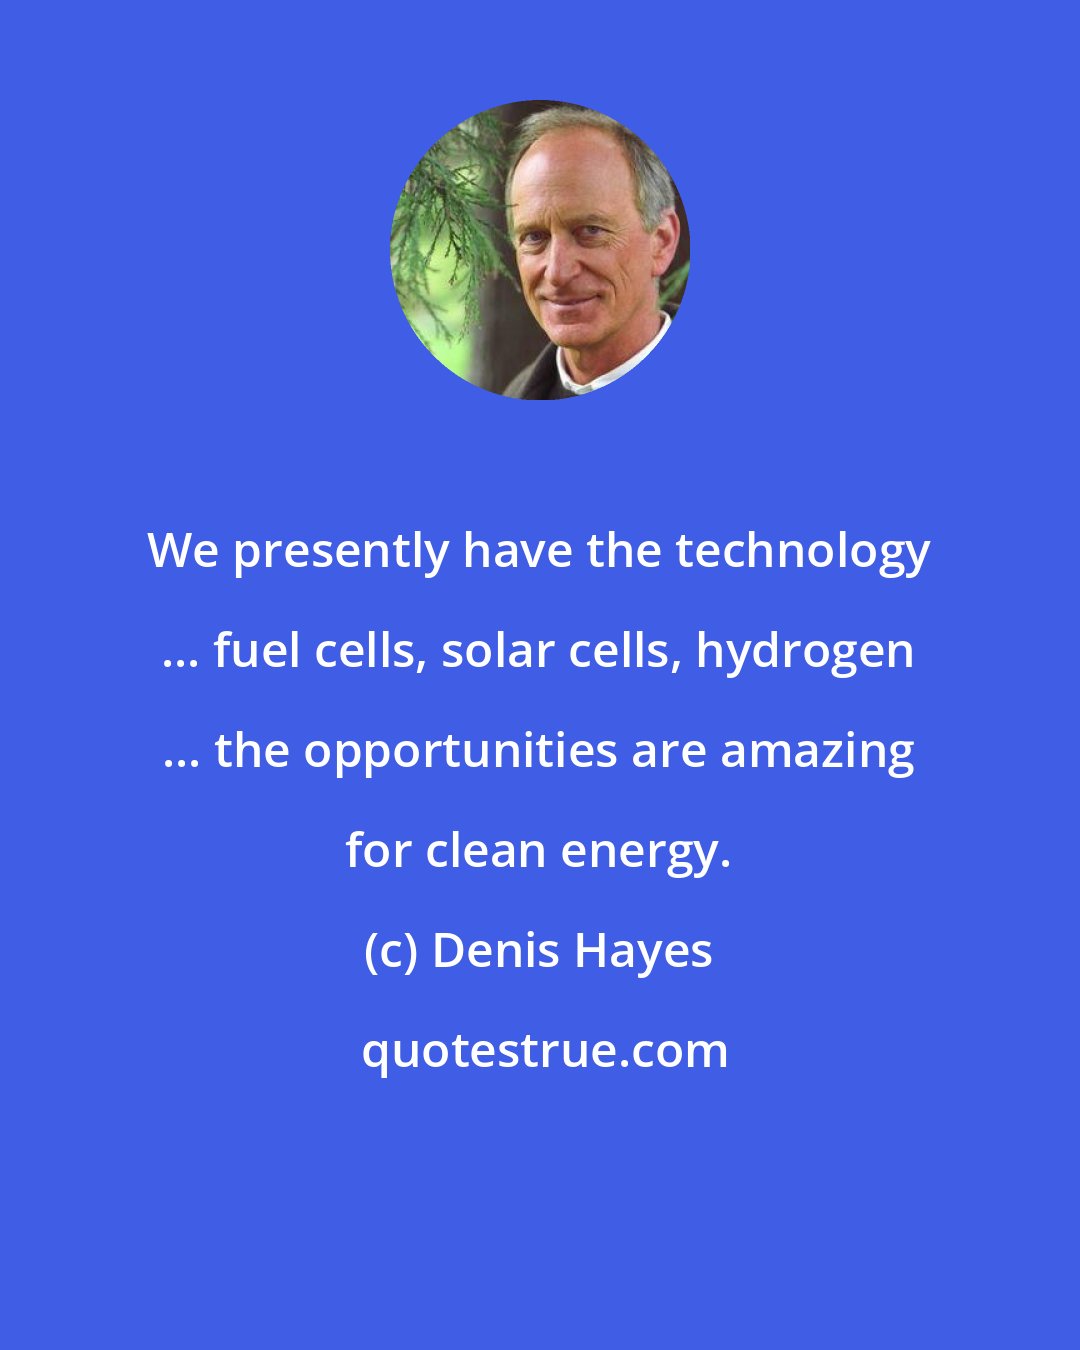 Denis Hayes: We presently have the technology ... fuel cells, solar cells, hydrogen ... the opportunities are amazing for clean energy.